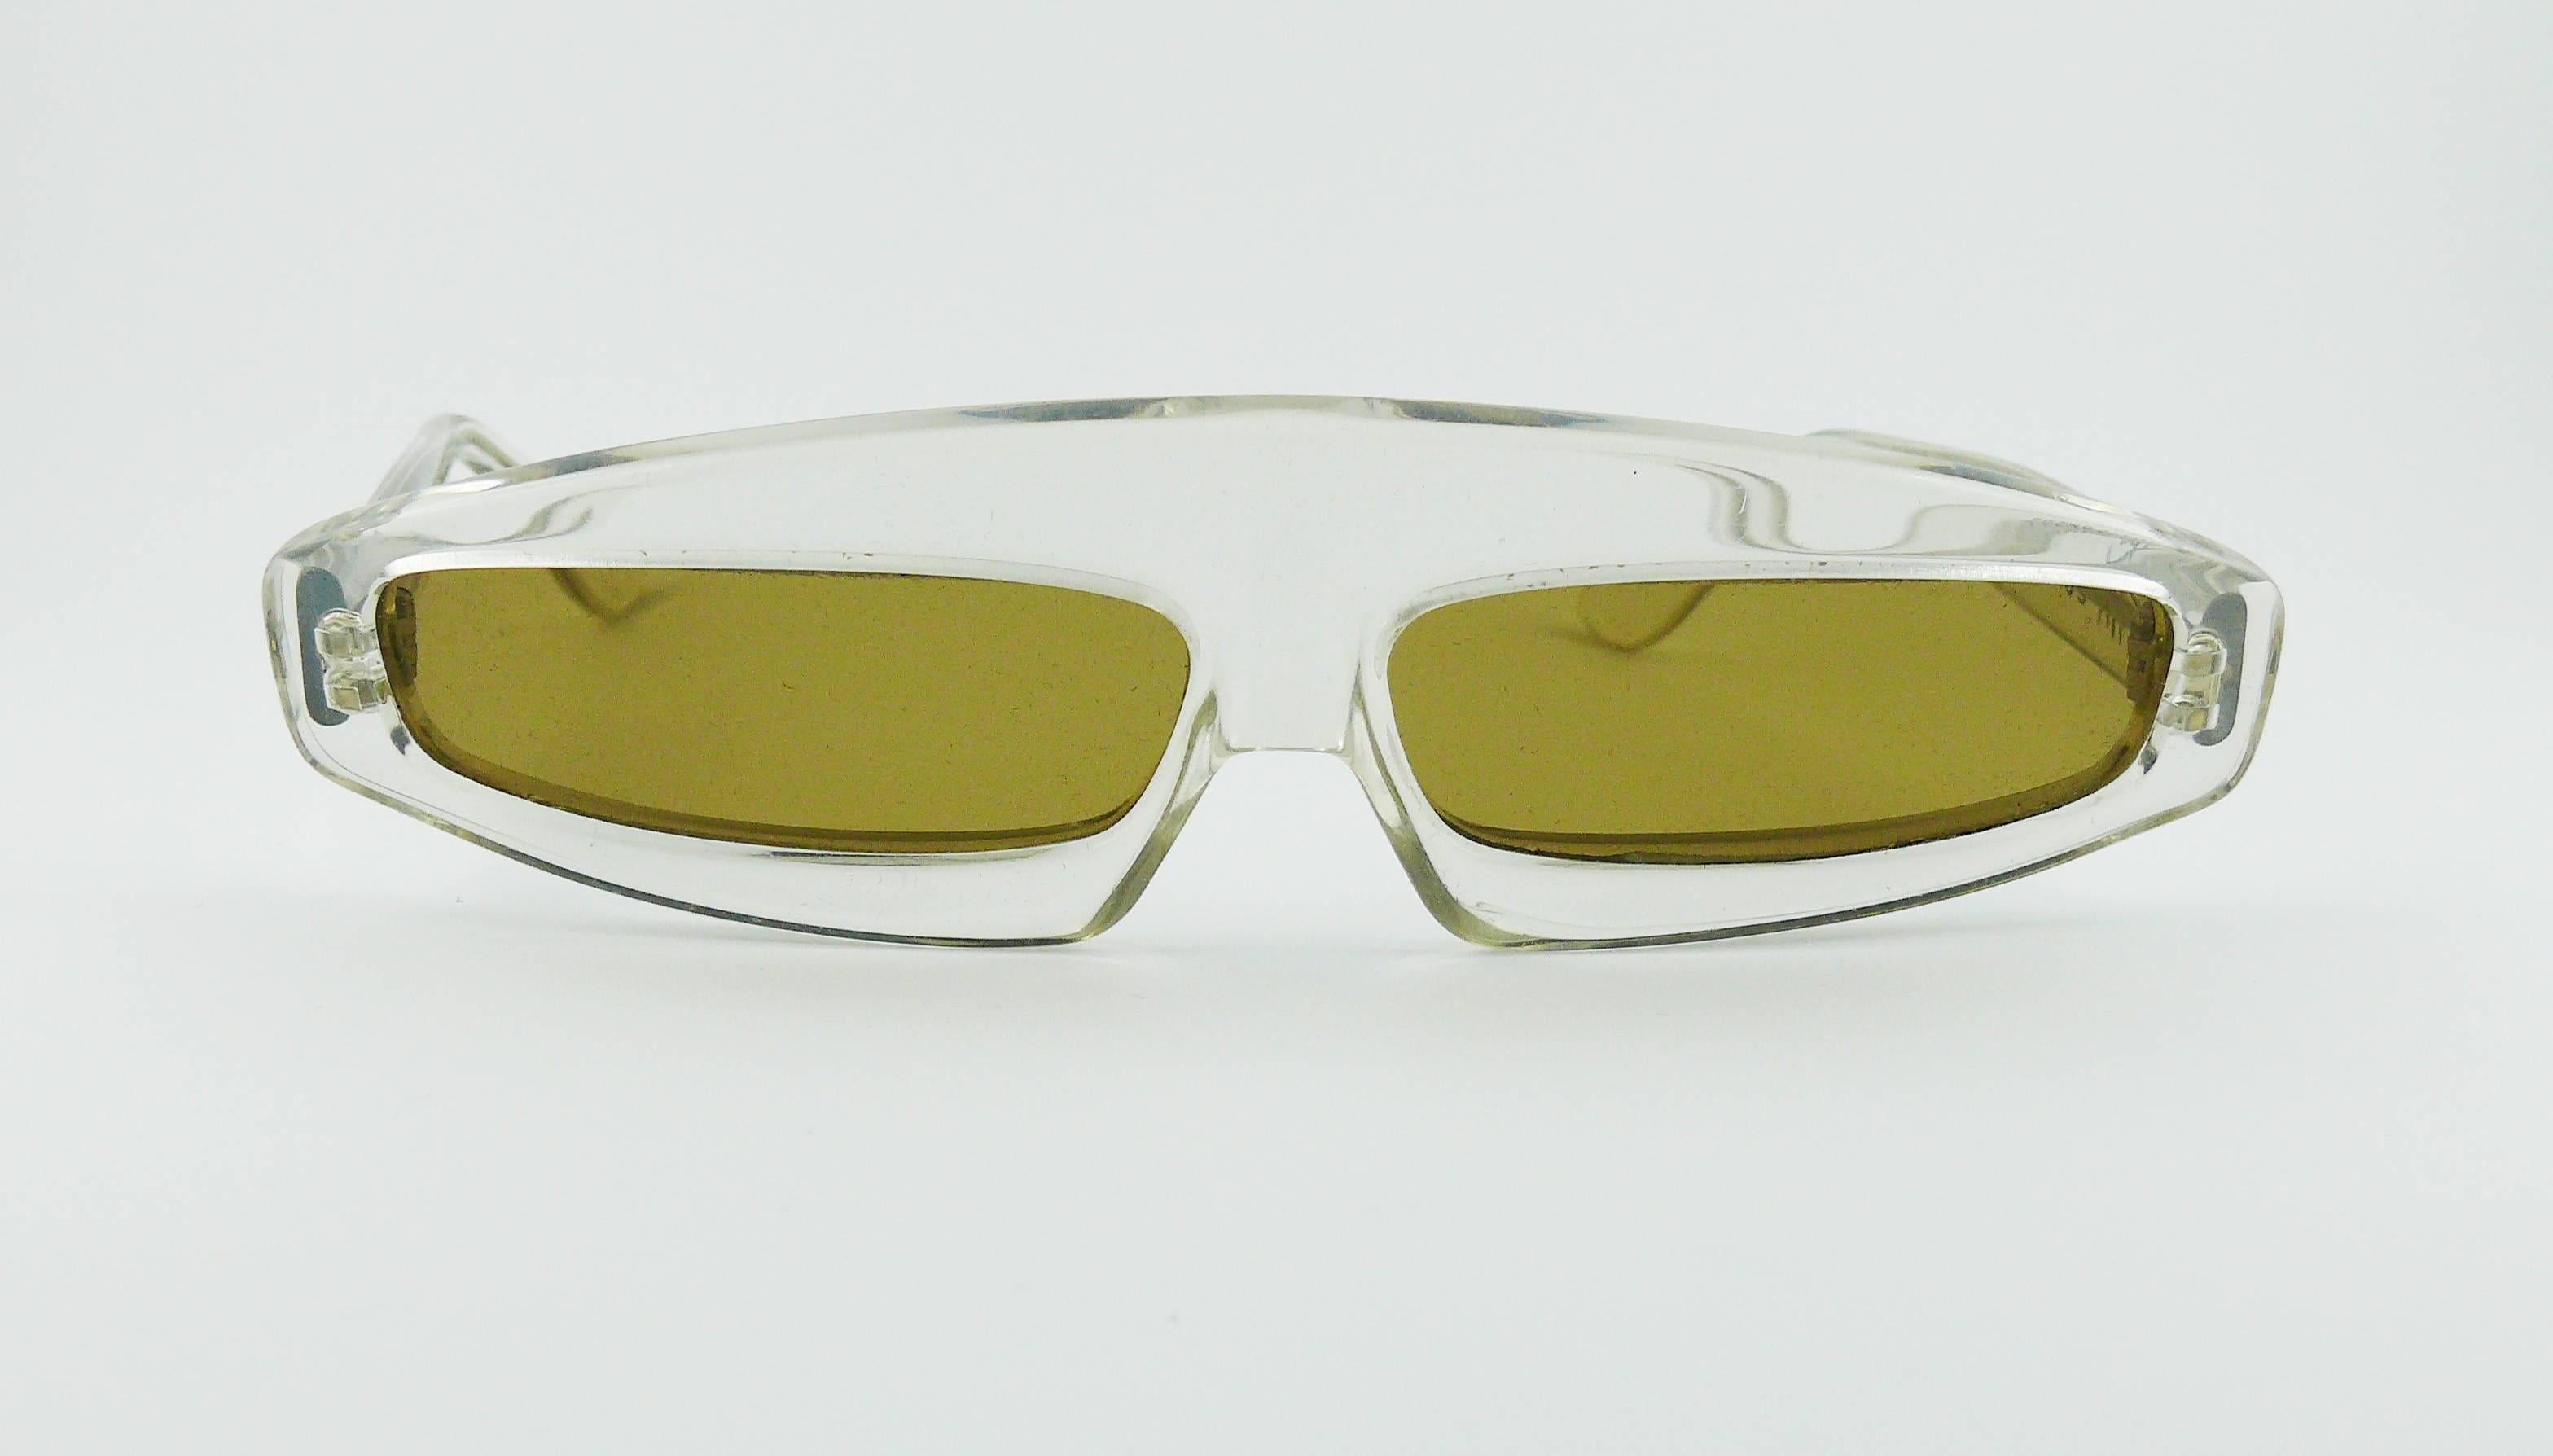 THIERRY MUGLER vintage rare iconic COSMOS sunglasses.

A similar model is photographied in VOGUE Paris May 1979.

These sunglasses are made of thick transparent lucite with silver toned structure. Lenses are in smoked color acrylic.

Signed TM